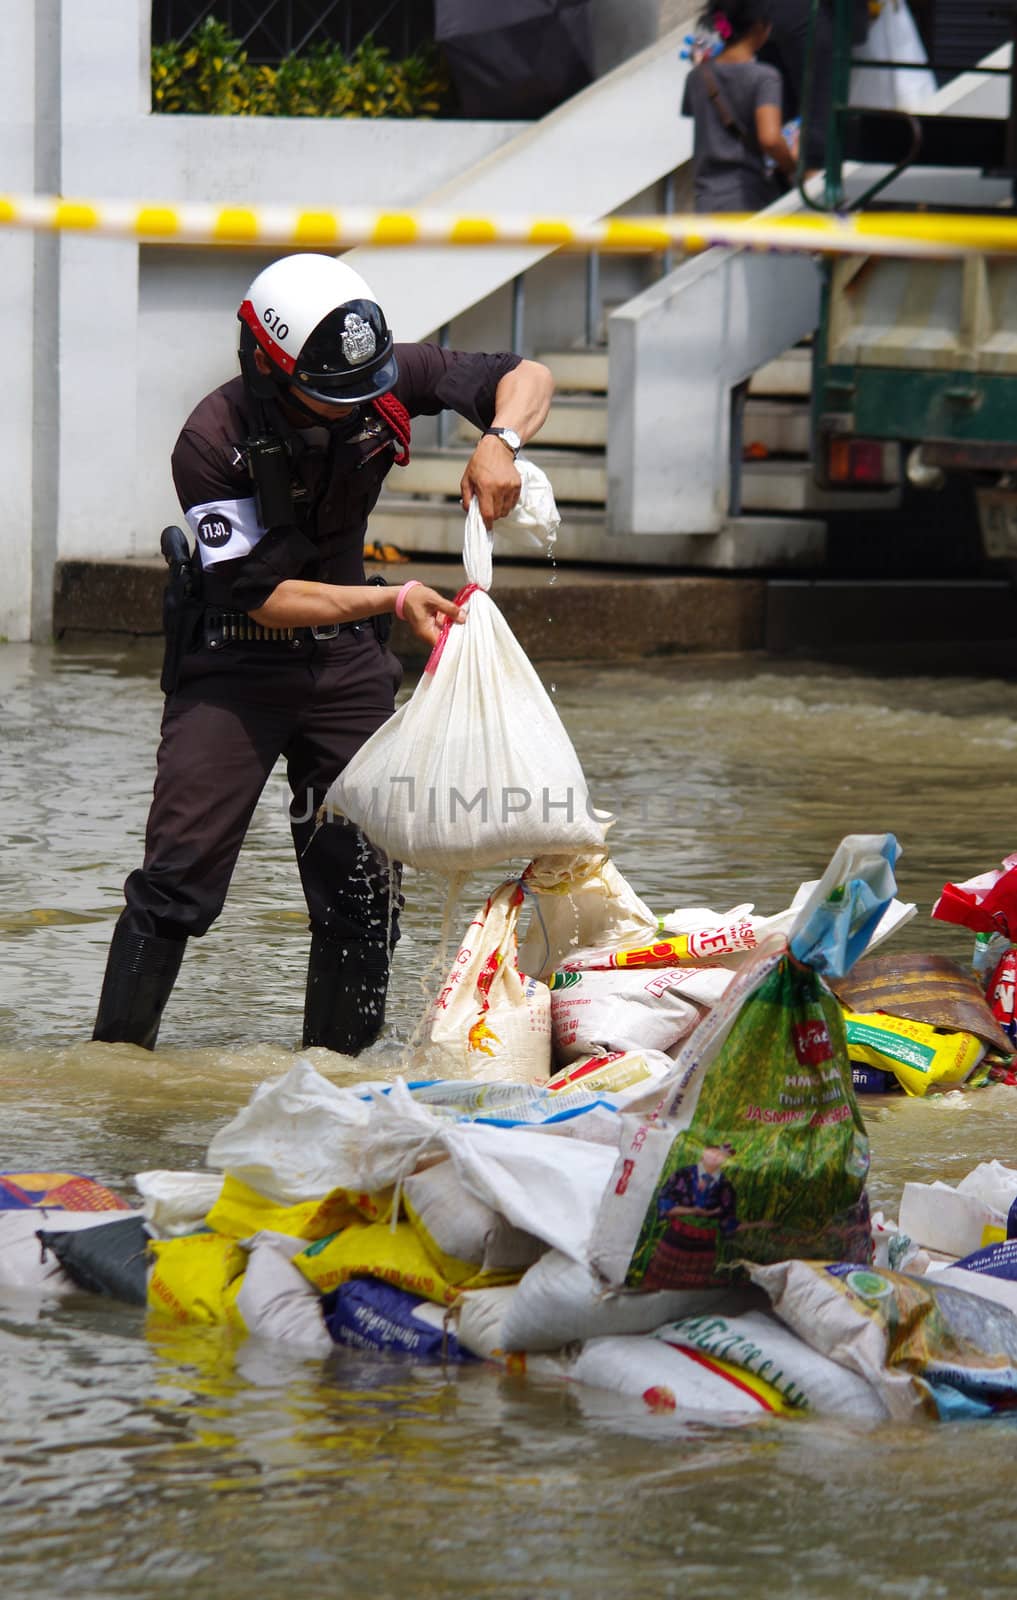 BANGKOK - OCT 30: Unidentified residents of Bangkok's Samsen road  Dusit district make their way through flooded streets after the Chao Phraya River bursts its banks on Oct 30, 2011 in Bangkok, Thailand.